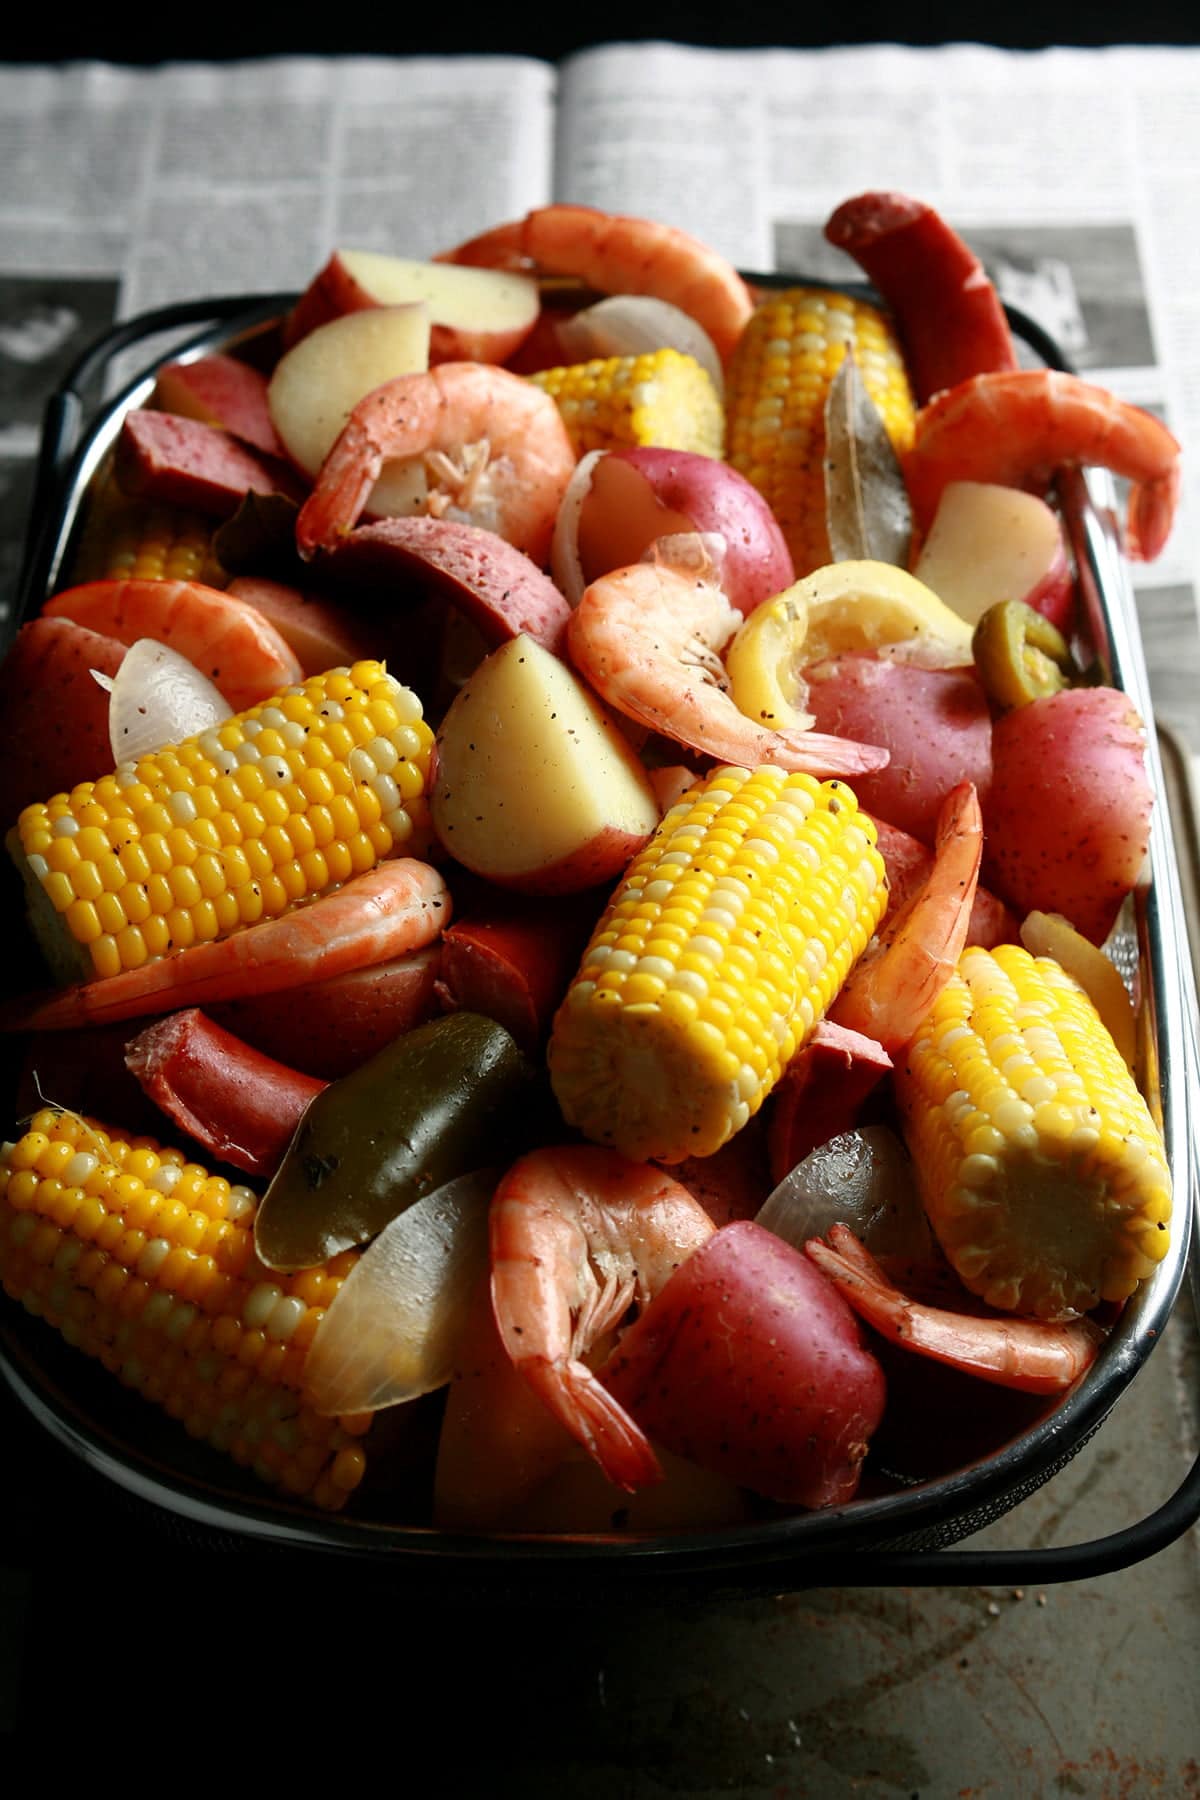 A close up view of a batch of low country boil: Red potatoes, corn on the cob, shrimp, and sausage.